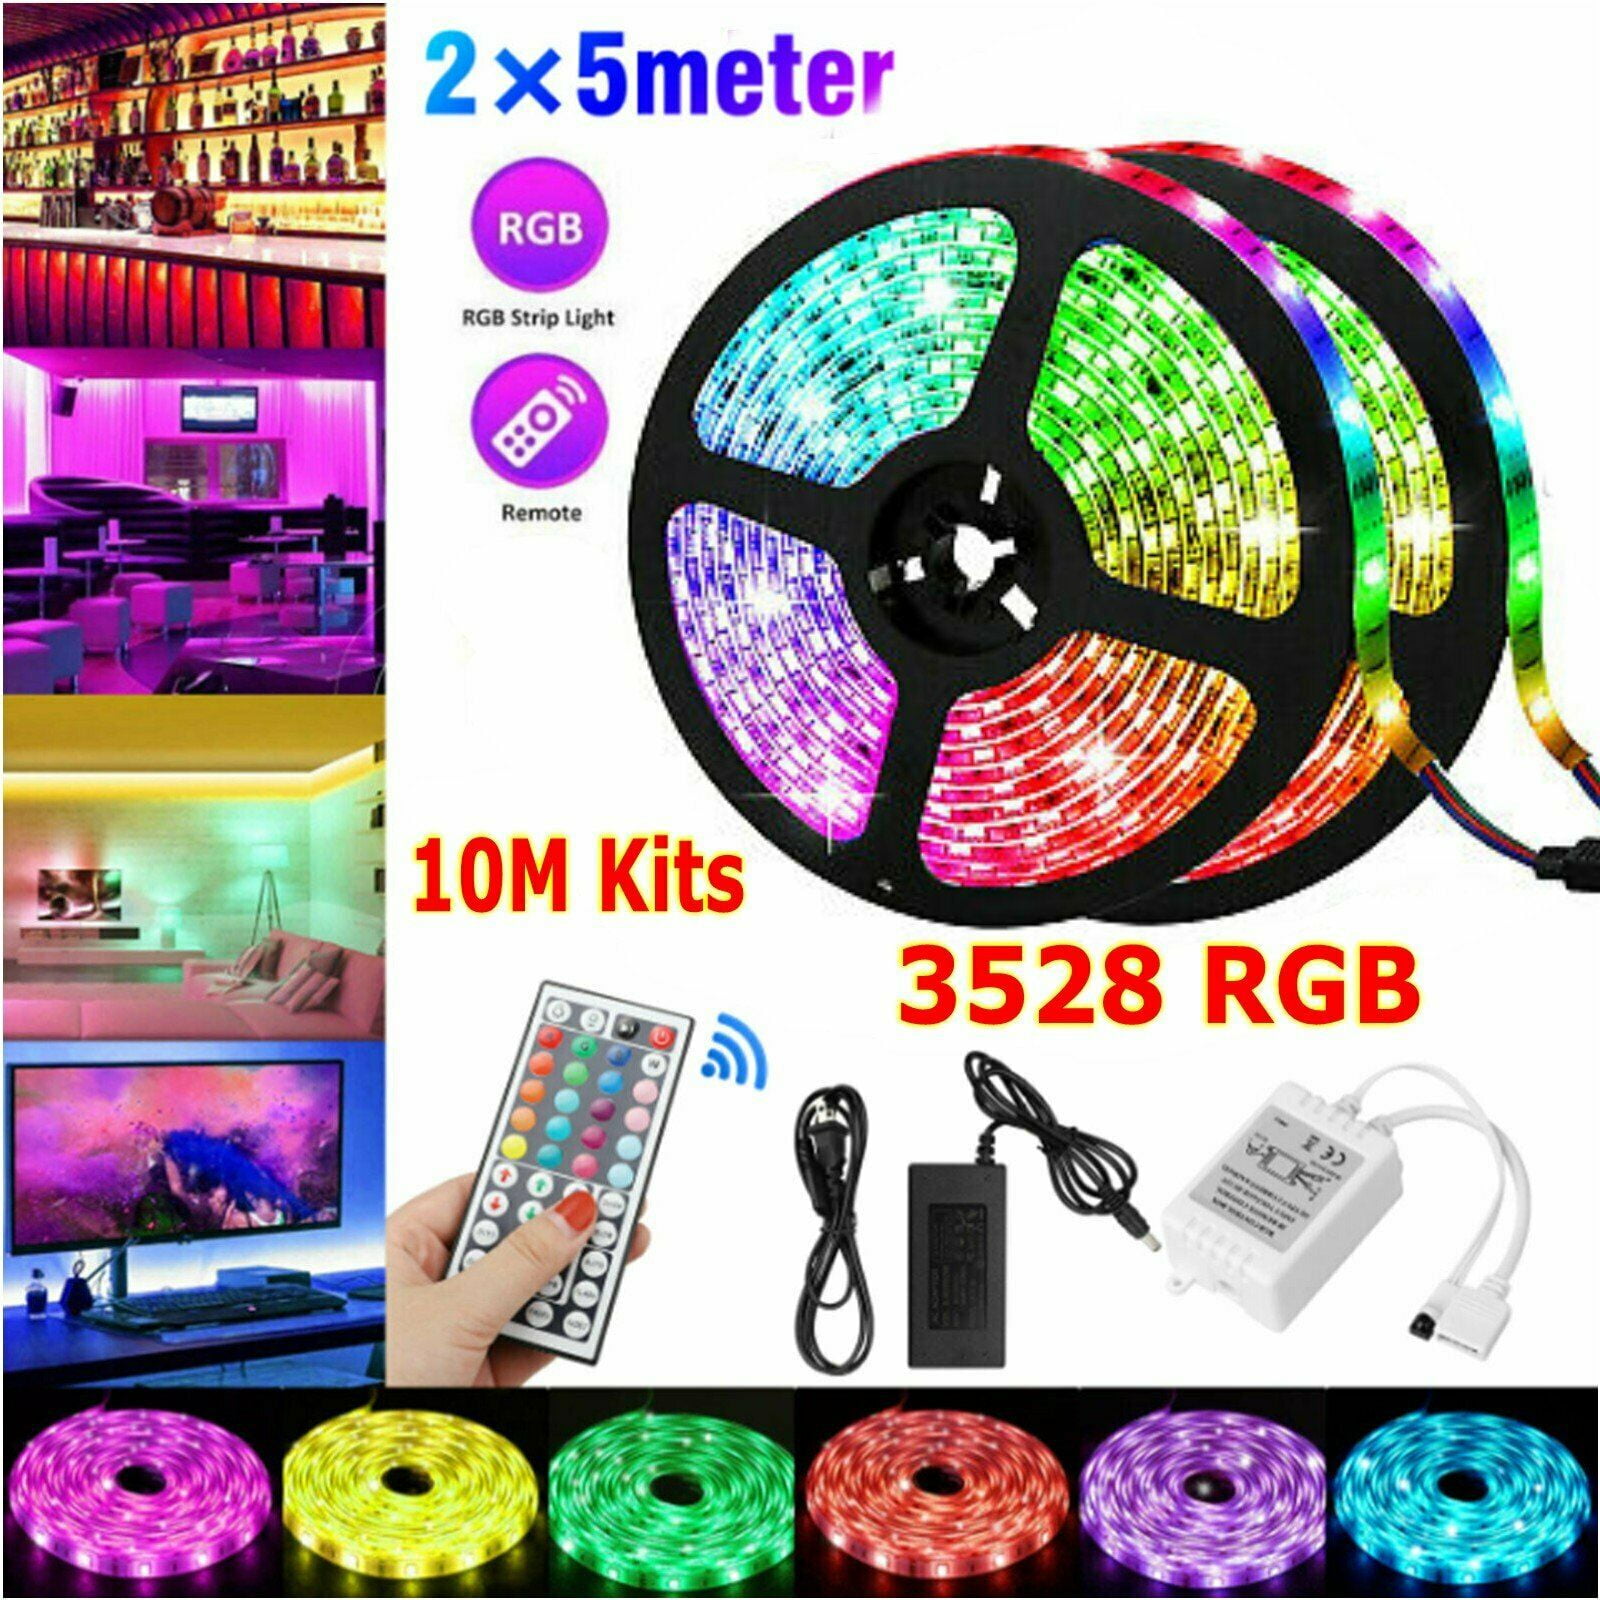 DIY Decoration. Bathroom Ceiling ZHT Dimmable Bright 600 LEDs Strip Light for Party Living Room Stairs Led Strip Lights 44 Keys IR Remote RGB Colorful 32.8ft Light for Bedroom 